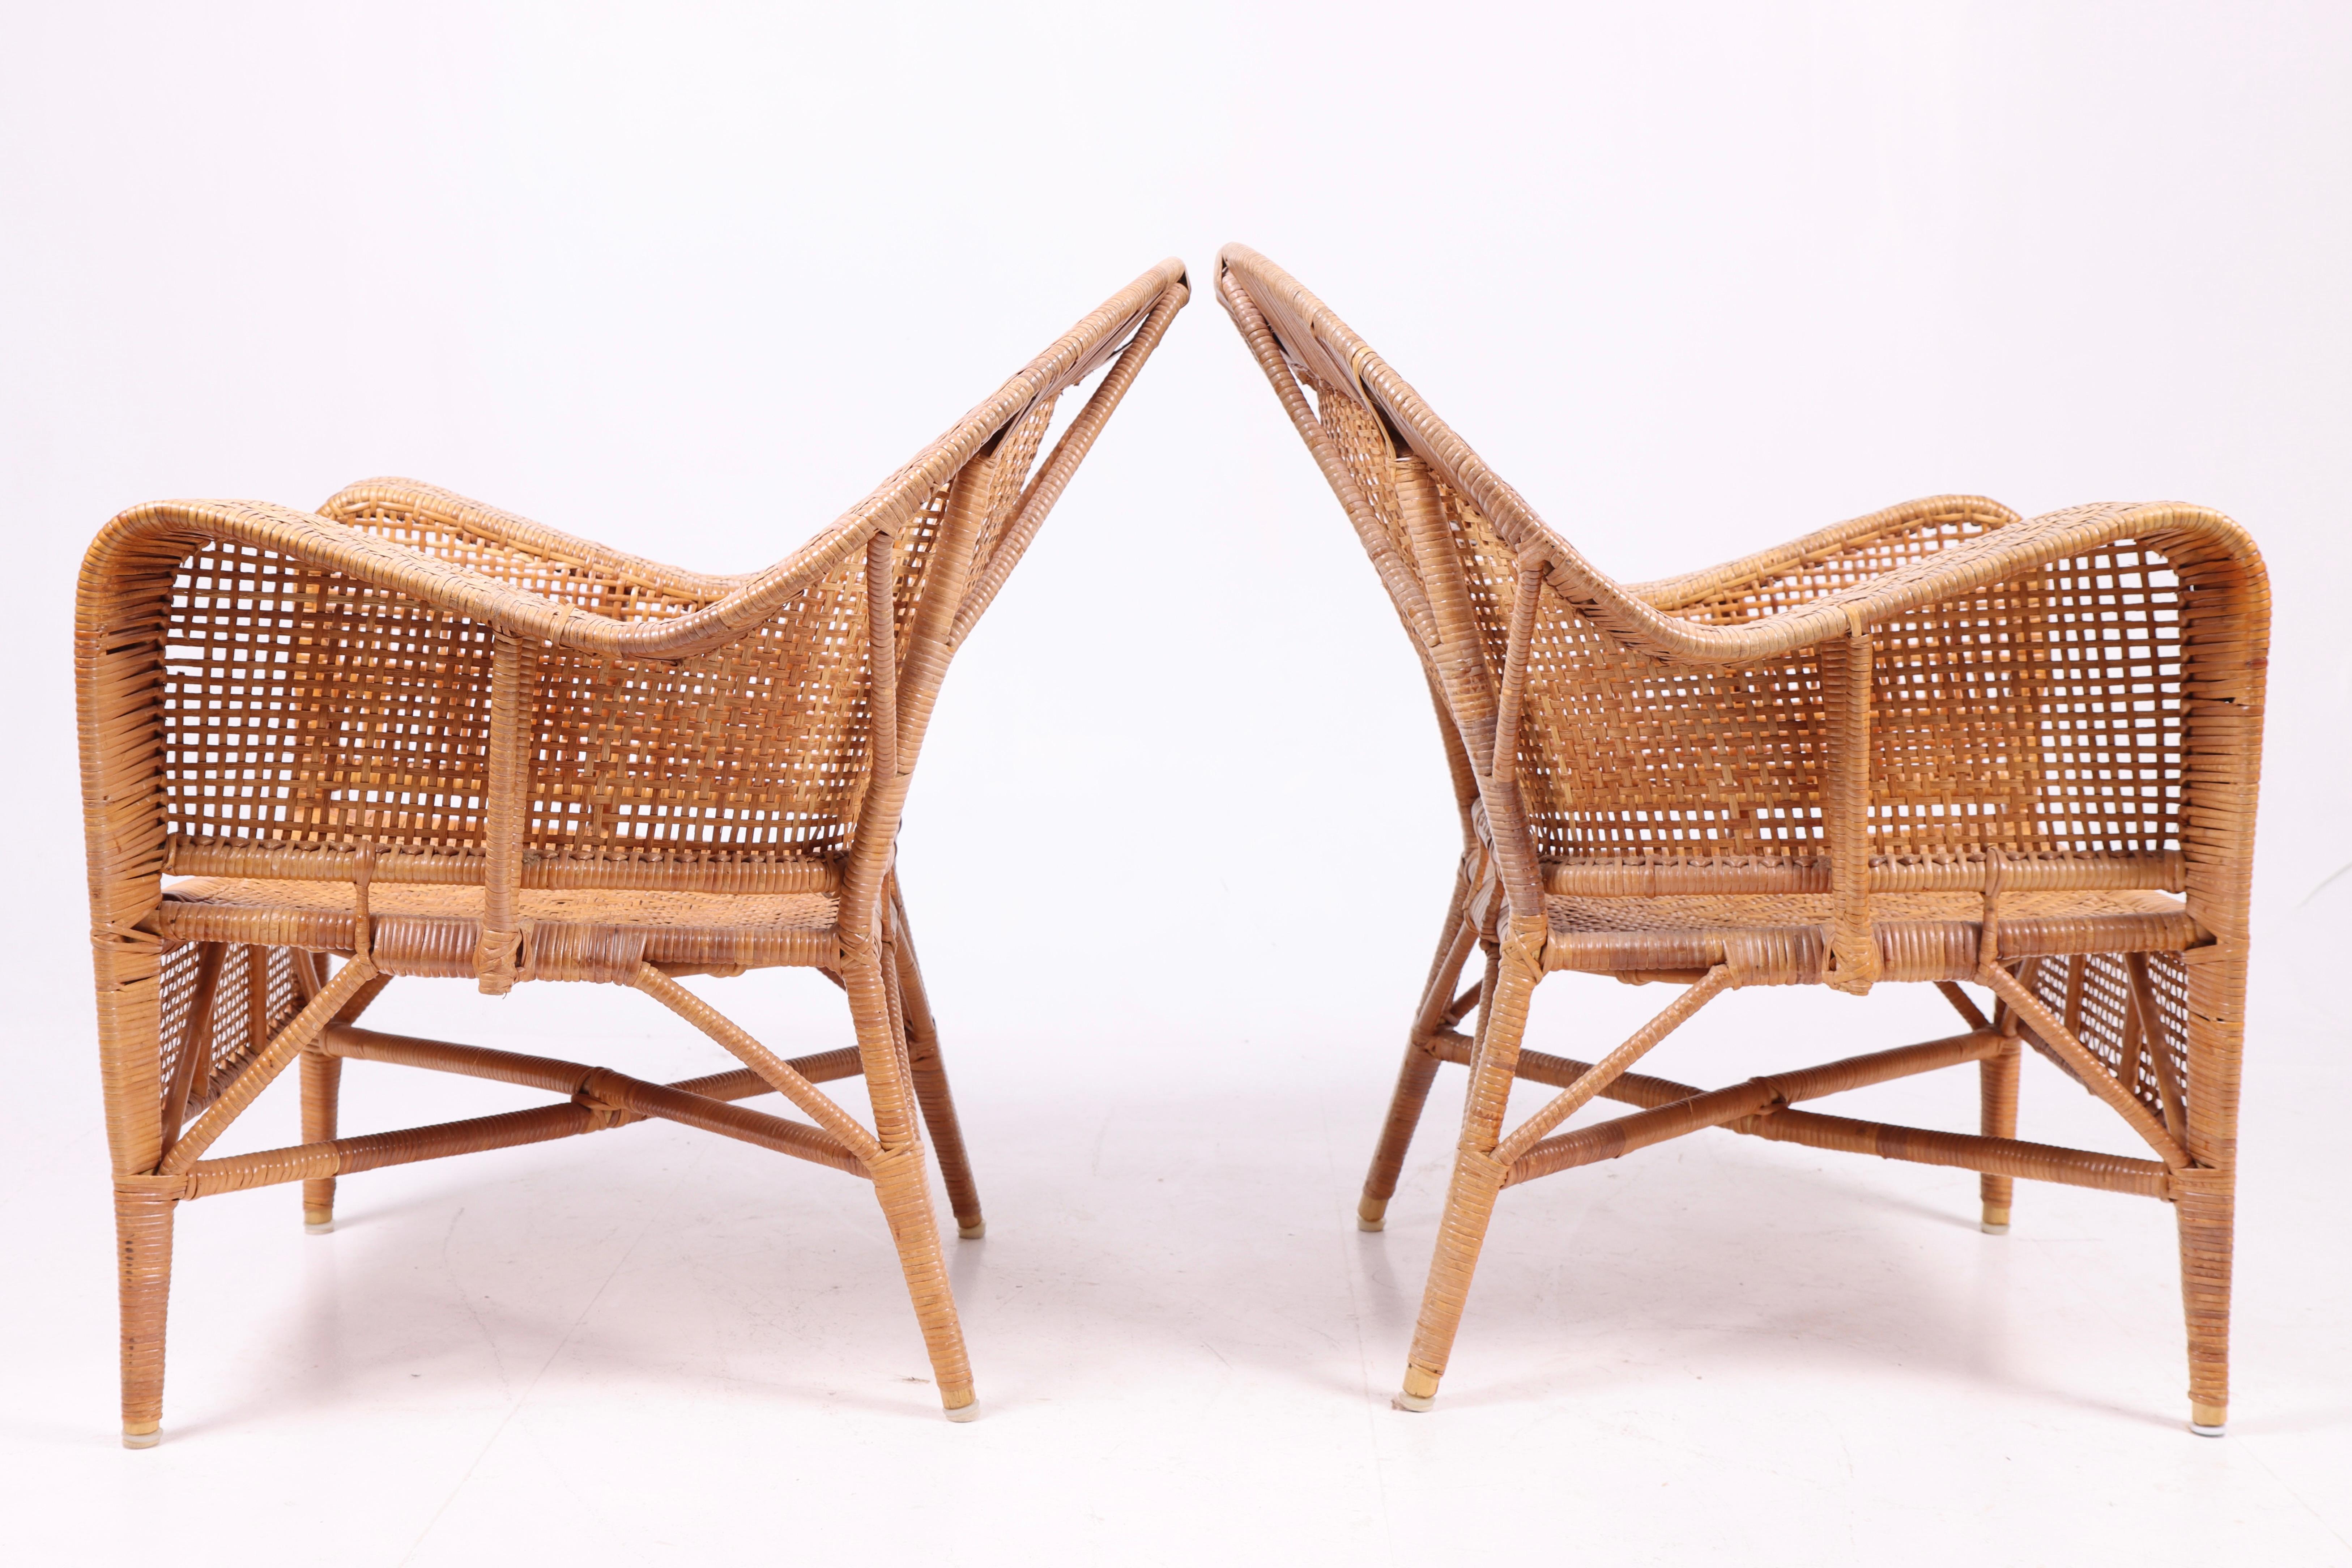 Pair of Rattan Lounge Chairs by Kay Fisker, 1950s For Sale 2